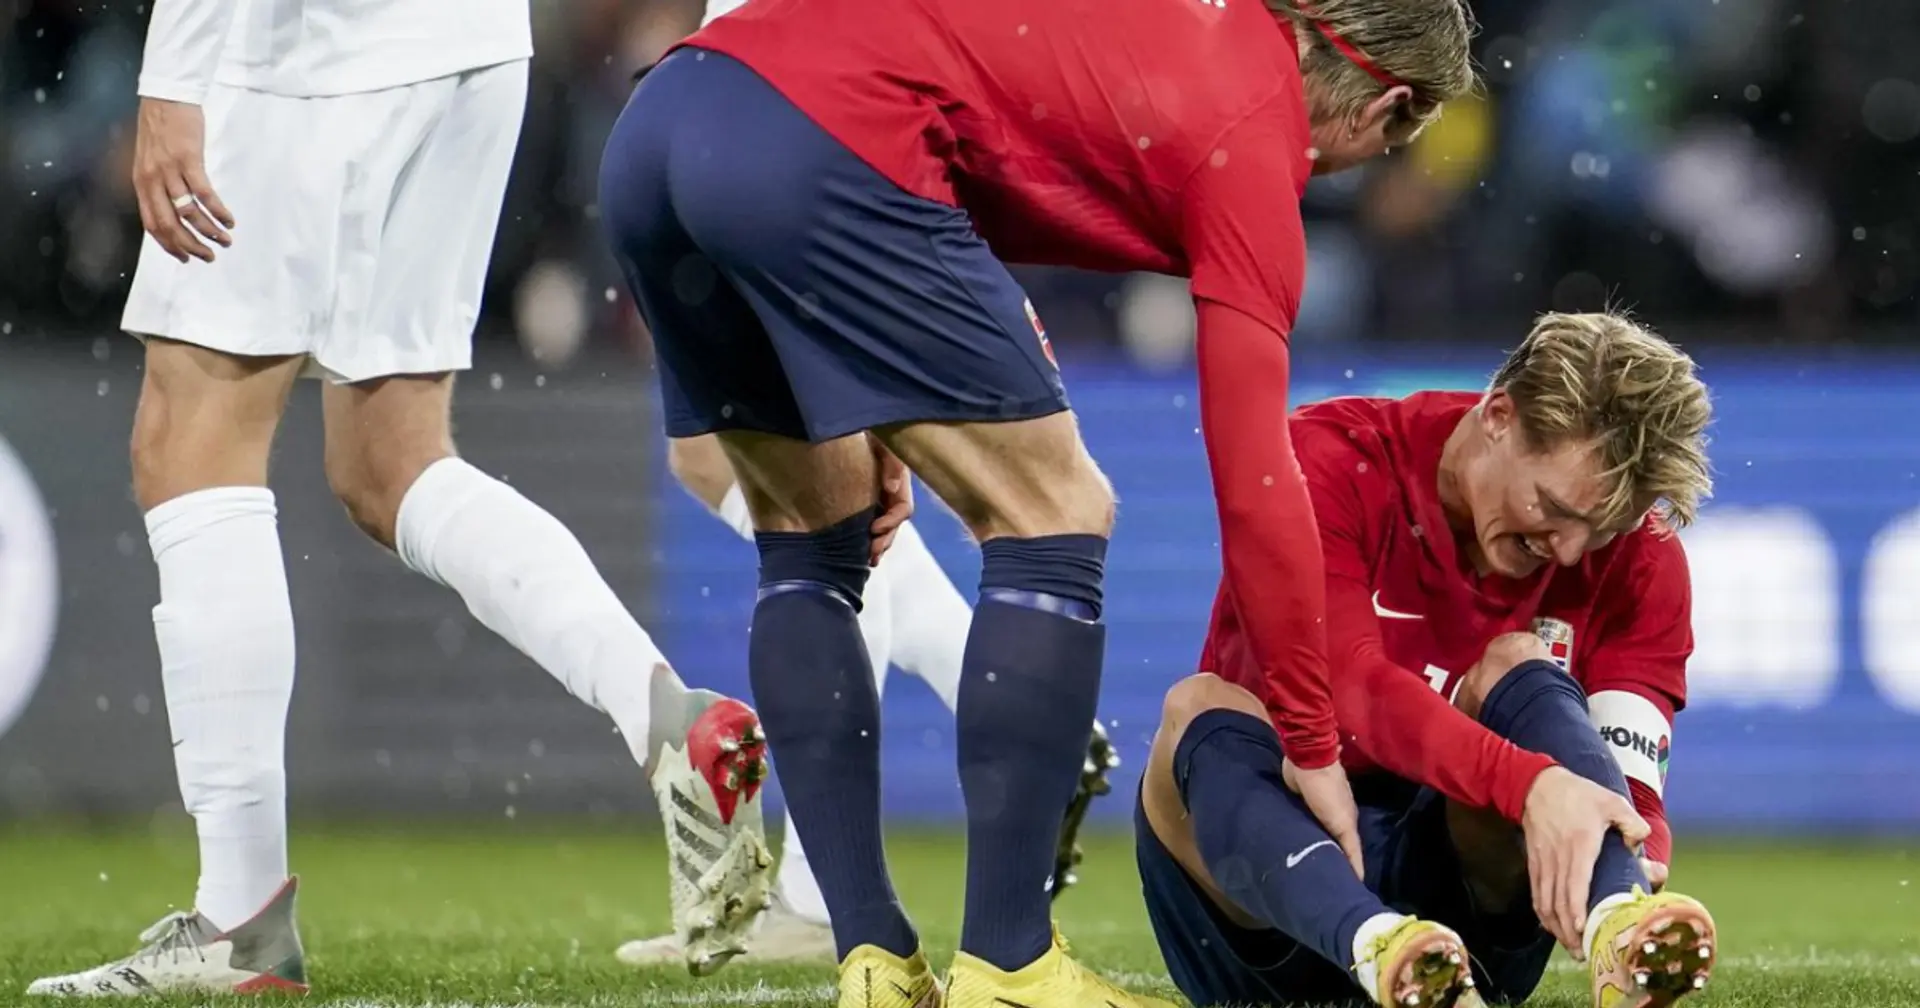 Martin Odegaard spotted limping after taking hit to ankle 